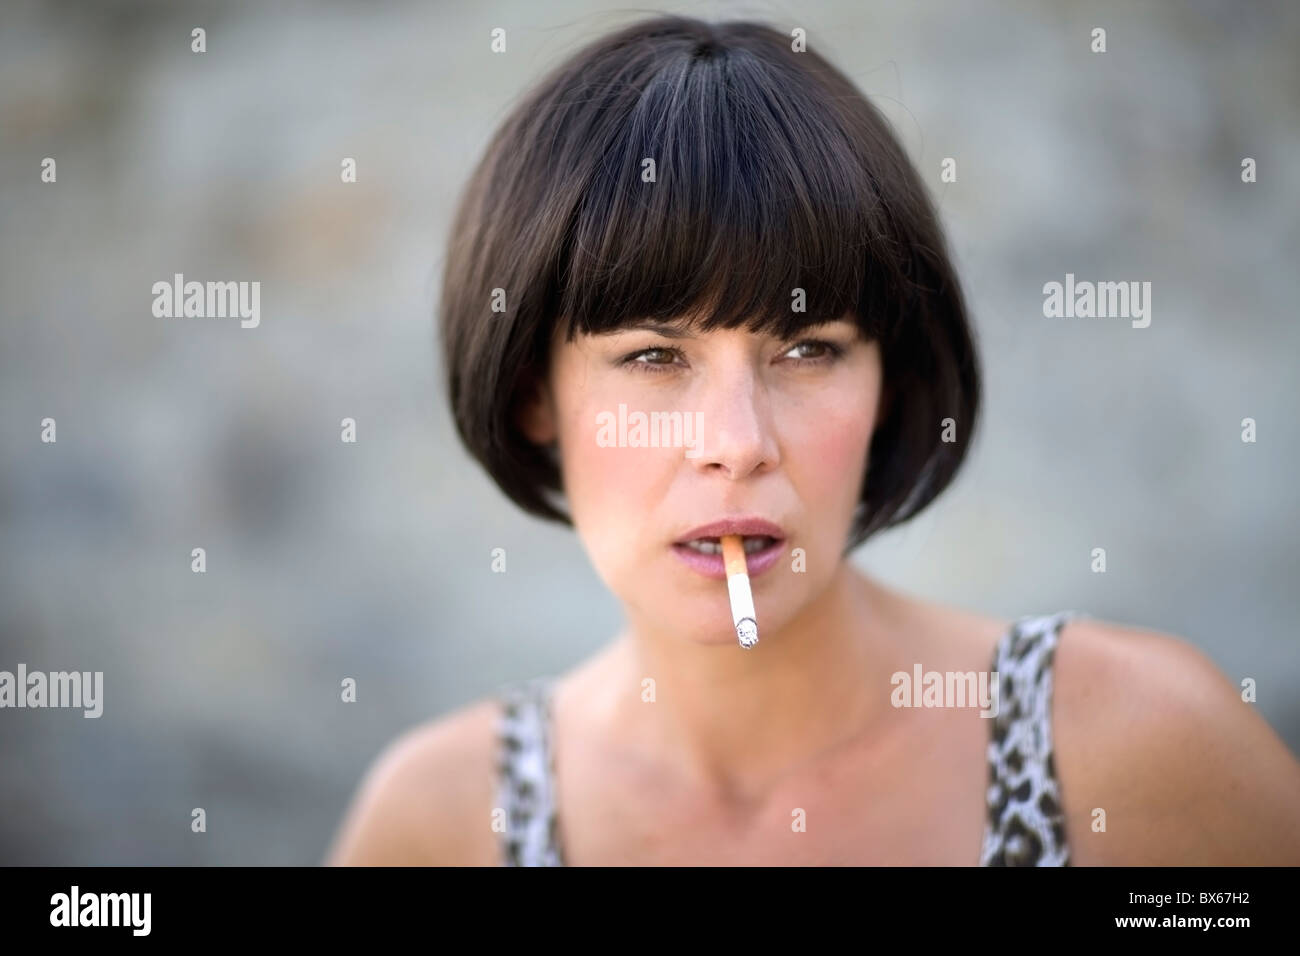 Woman with cigarette Stock Photo